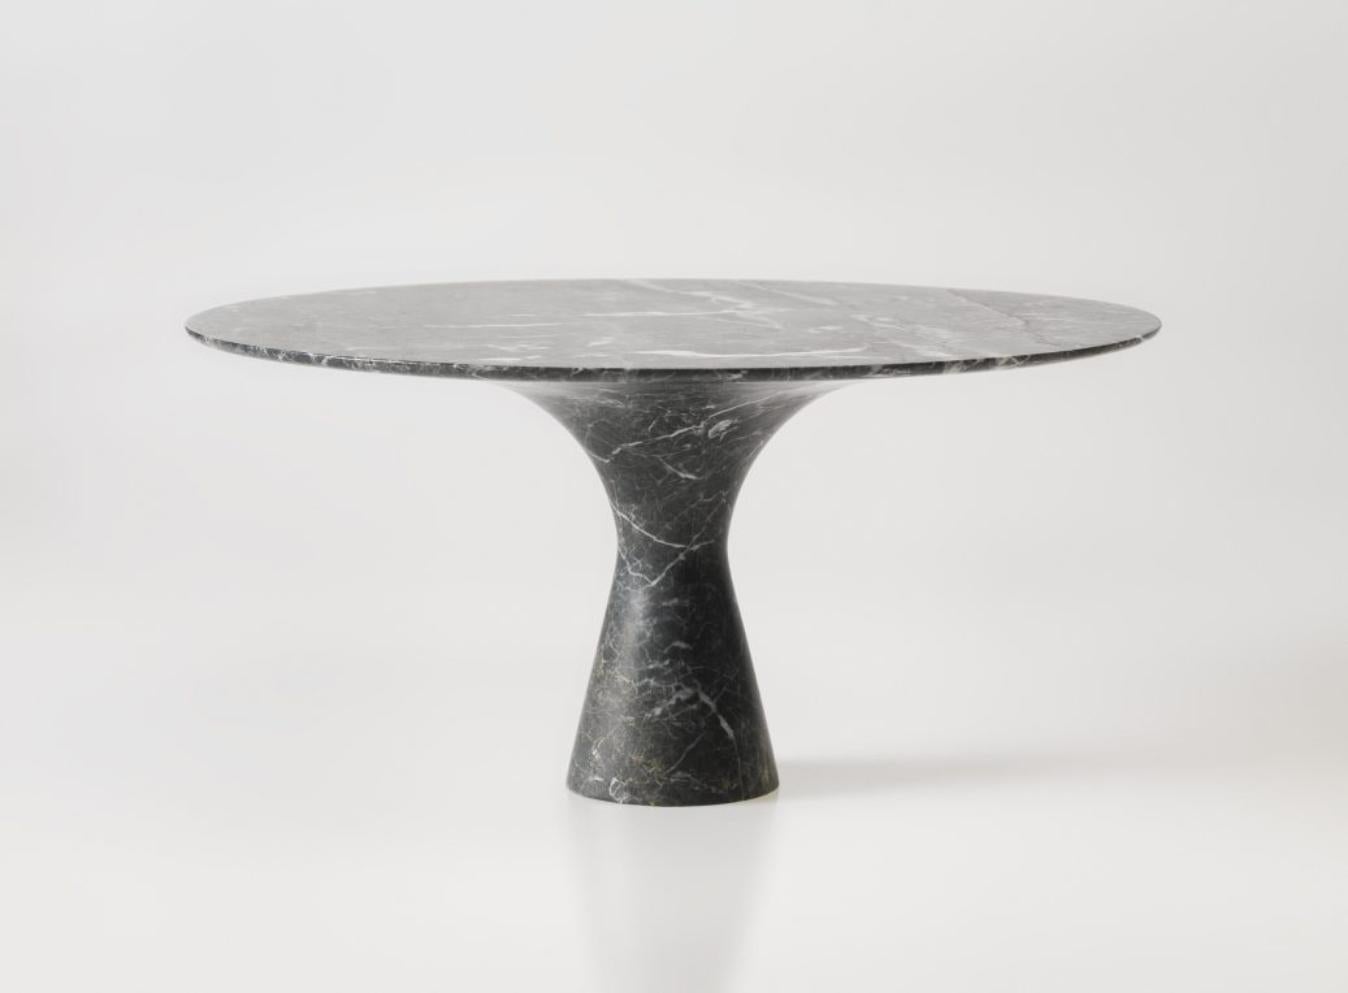 Grey Saint Laurent refined contemporary marble dining table 130/75
Dimensions: 130 x 75 cm
Materials: Grey Saint Laurent

Angelo is the essence of a round table in natural stone, a sculptural shape in robust material with elegant lines and